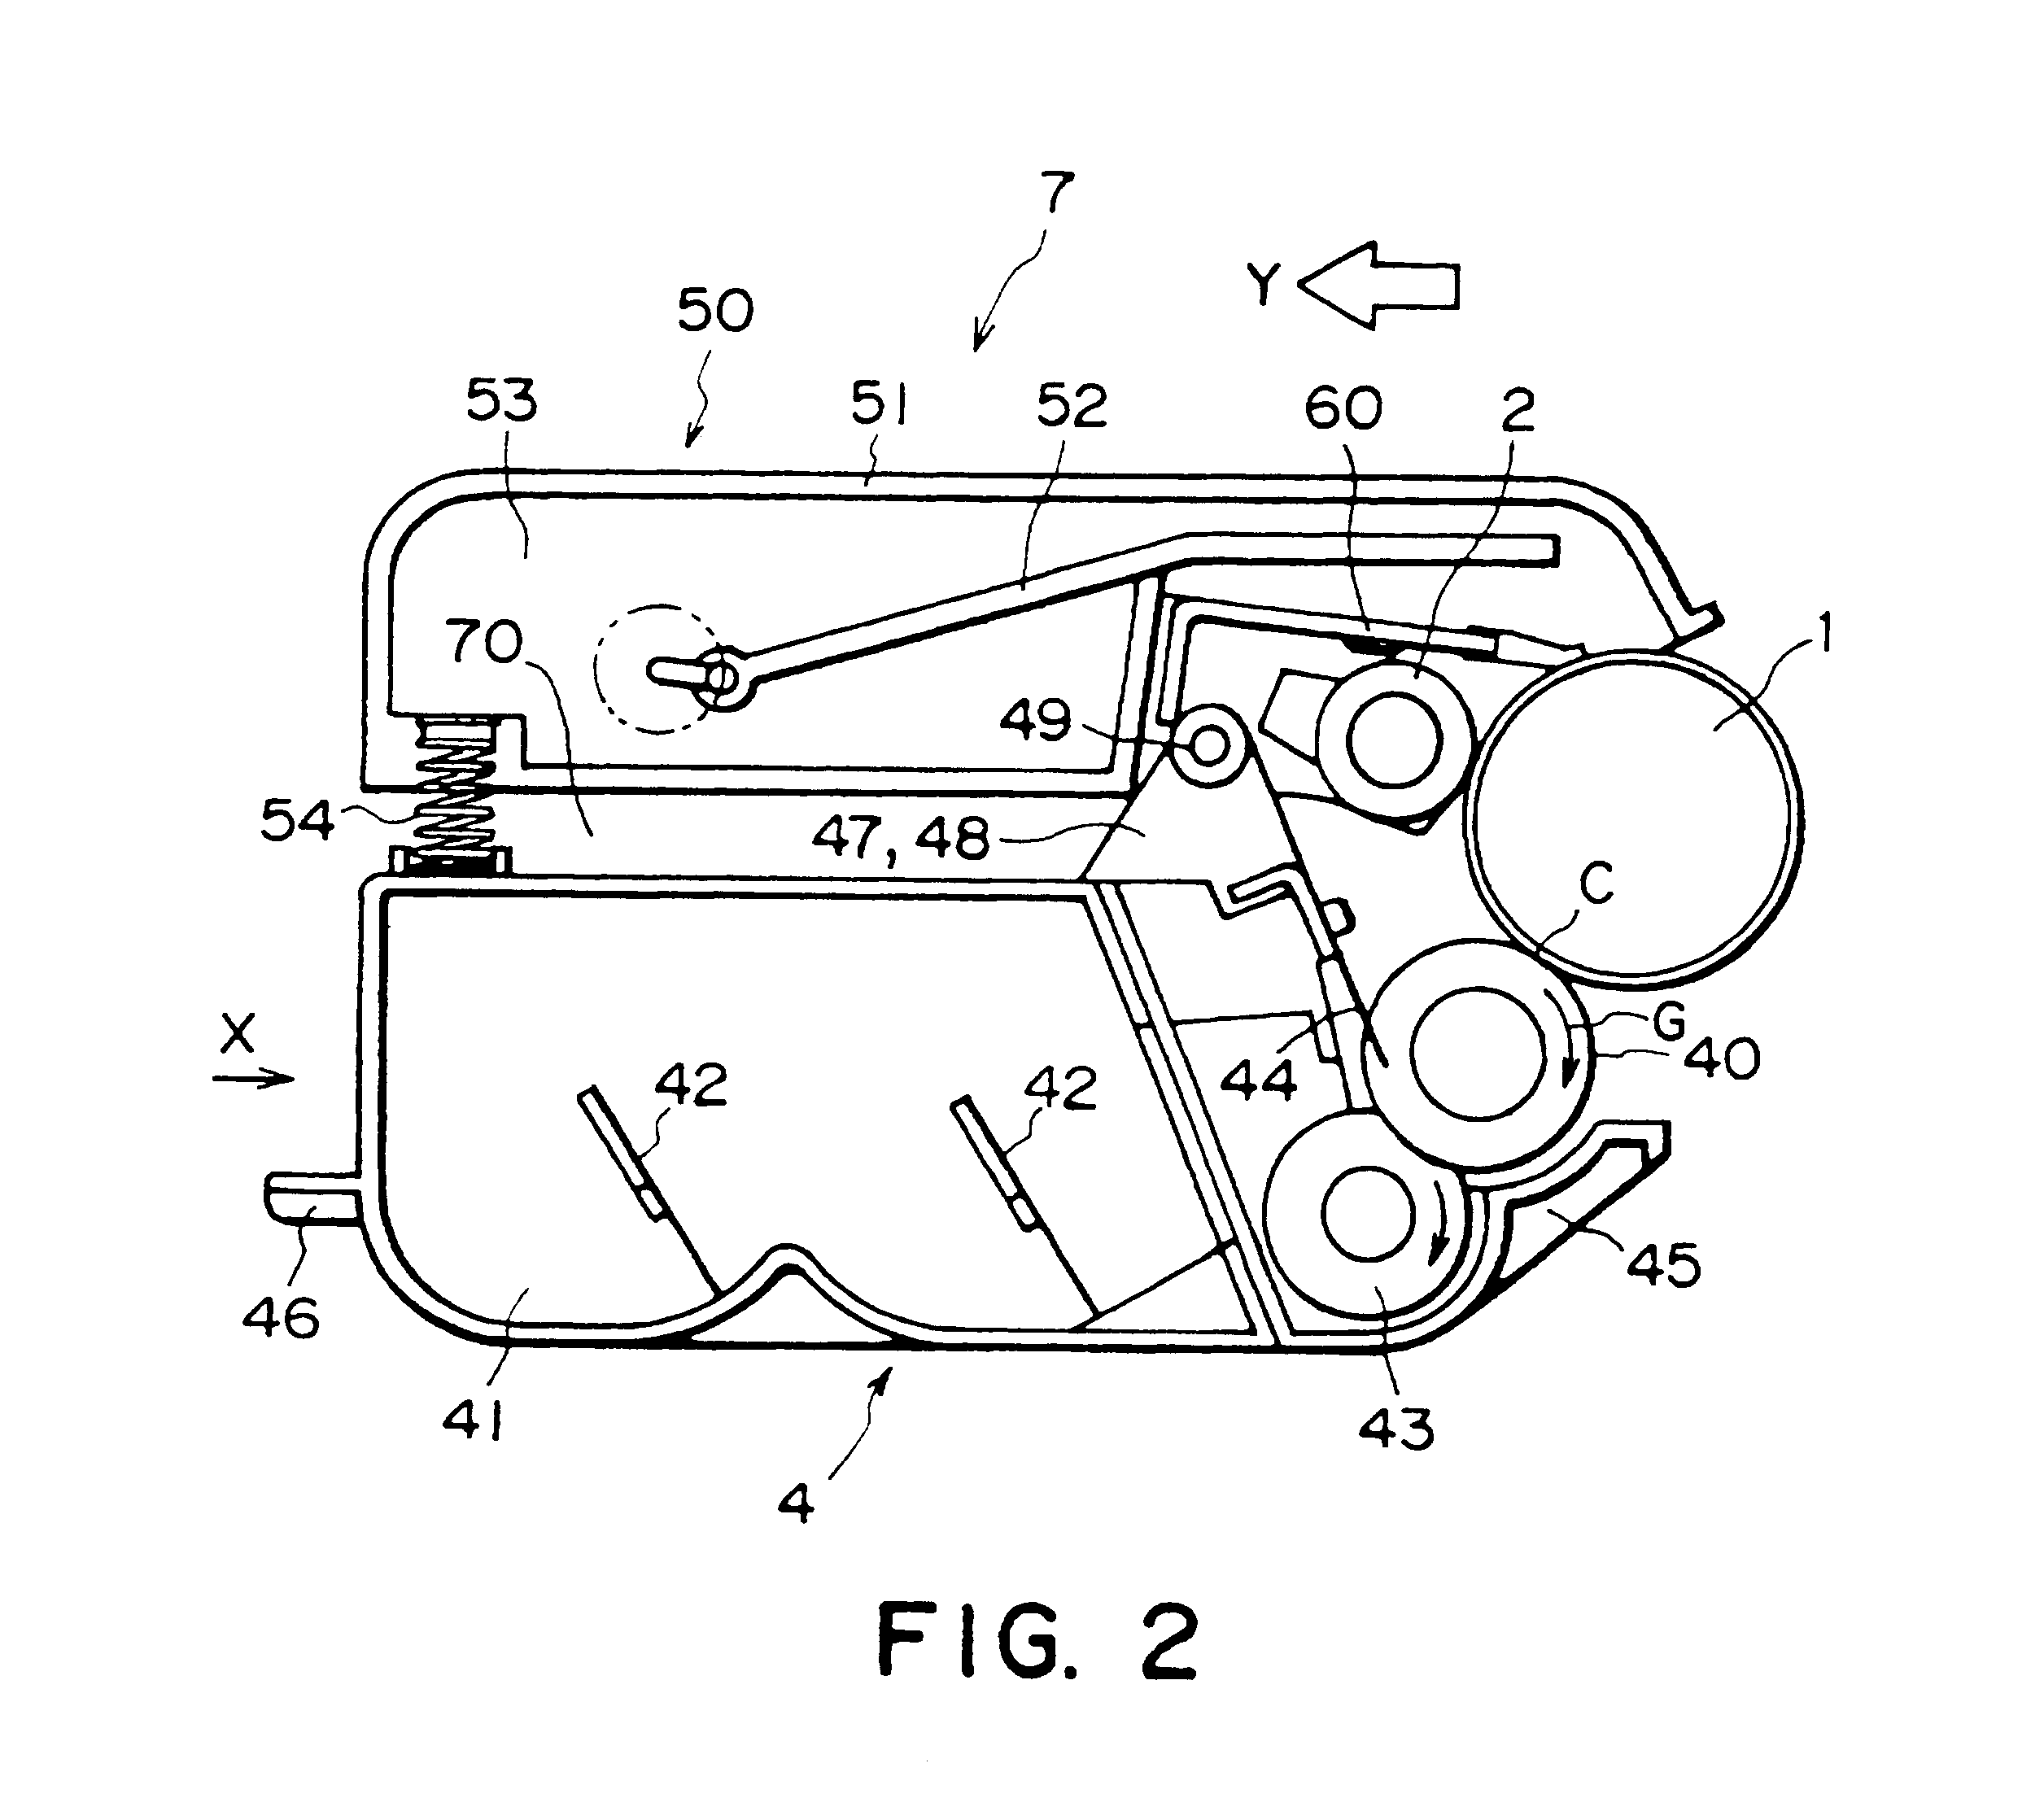 Process cartridge, image forming apparatus and separating mechanism for separating developing member from photosensitive drum